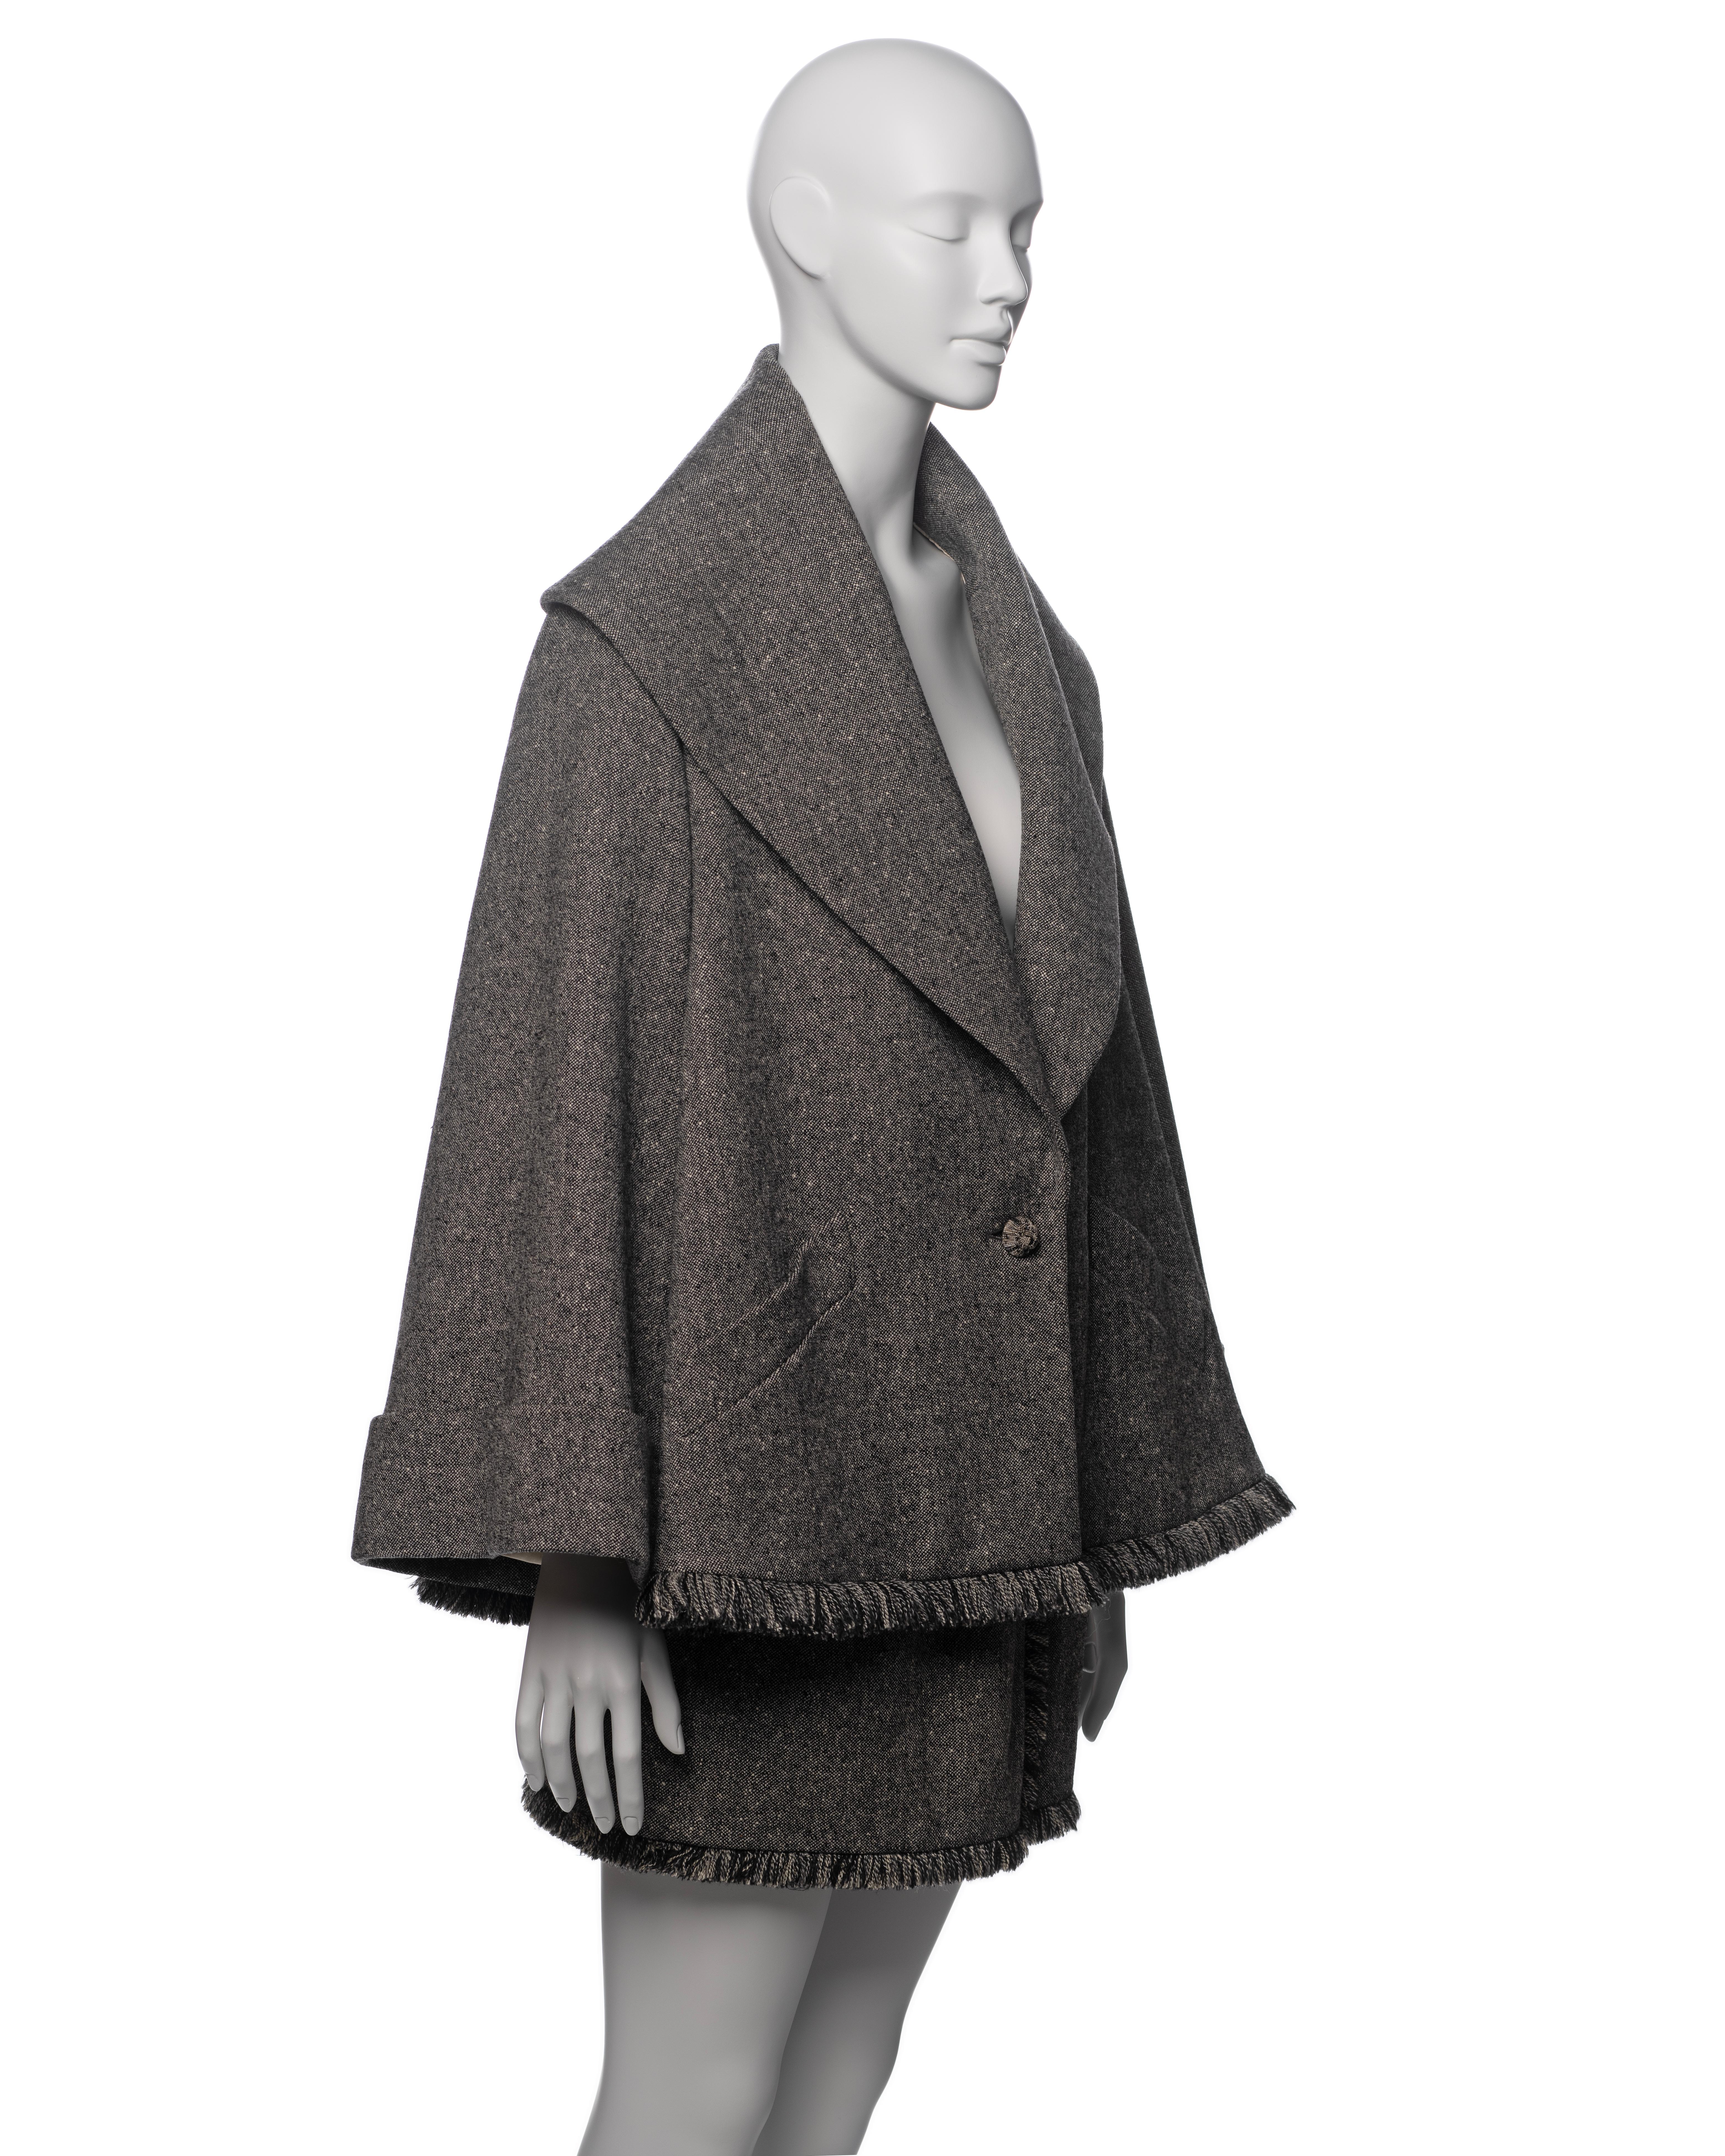 Christian Dior by John Galliano Grey Tweed Jacket and Mini Skirt Suit, FW 1998 For Sale 7